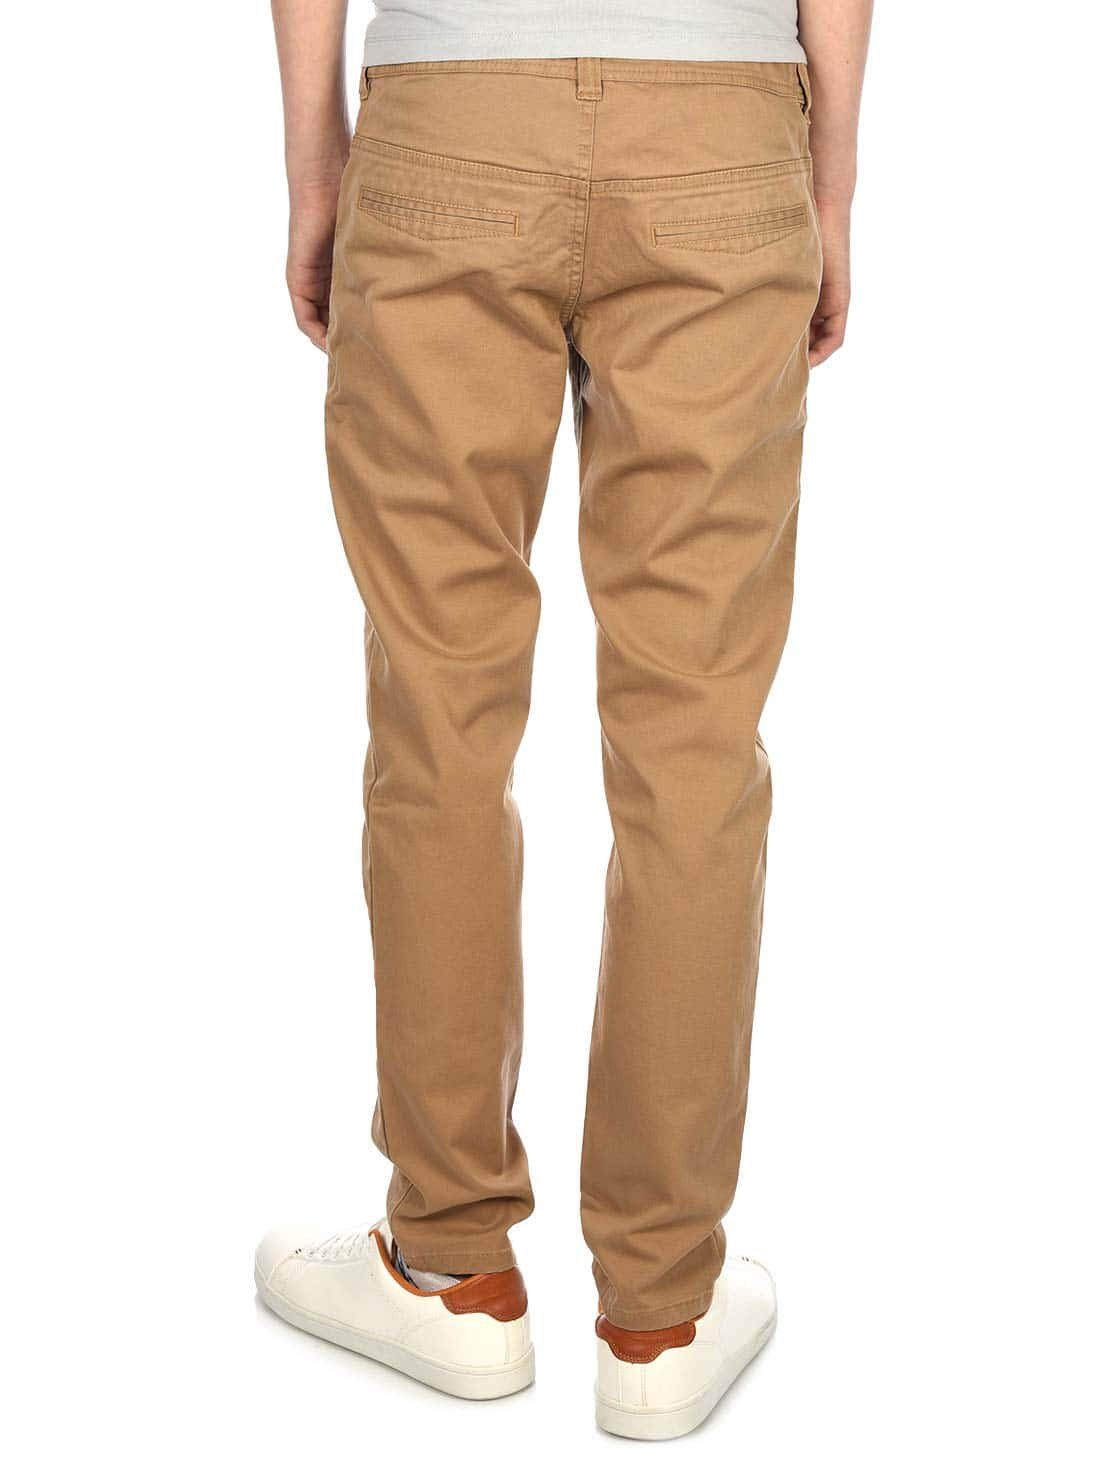 casual Beige Chinohose (1-tlg) BEZLIT Chino Hose Jungen